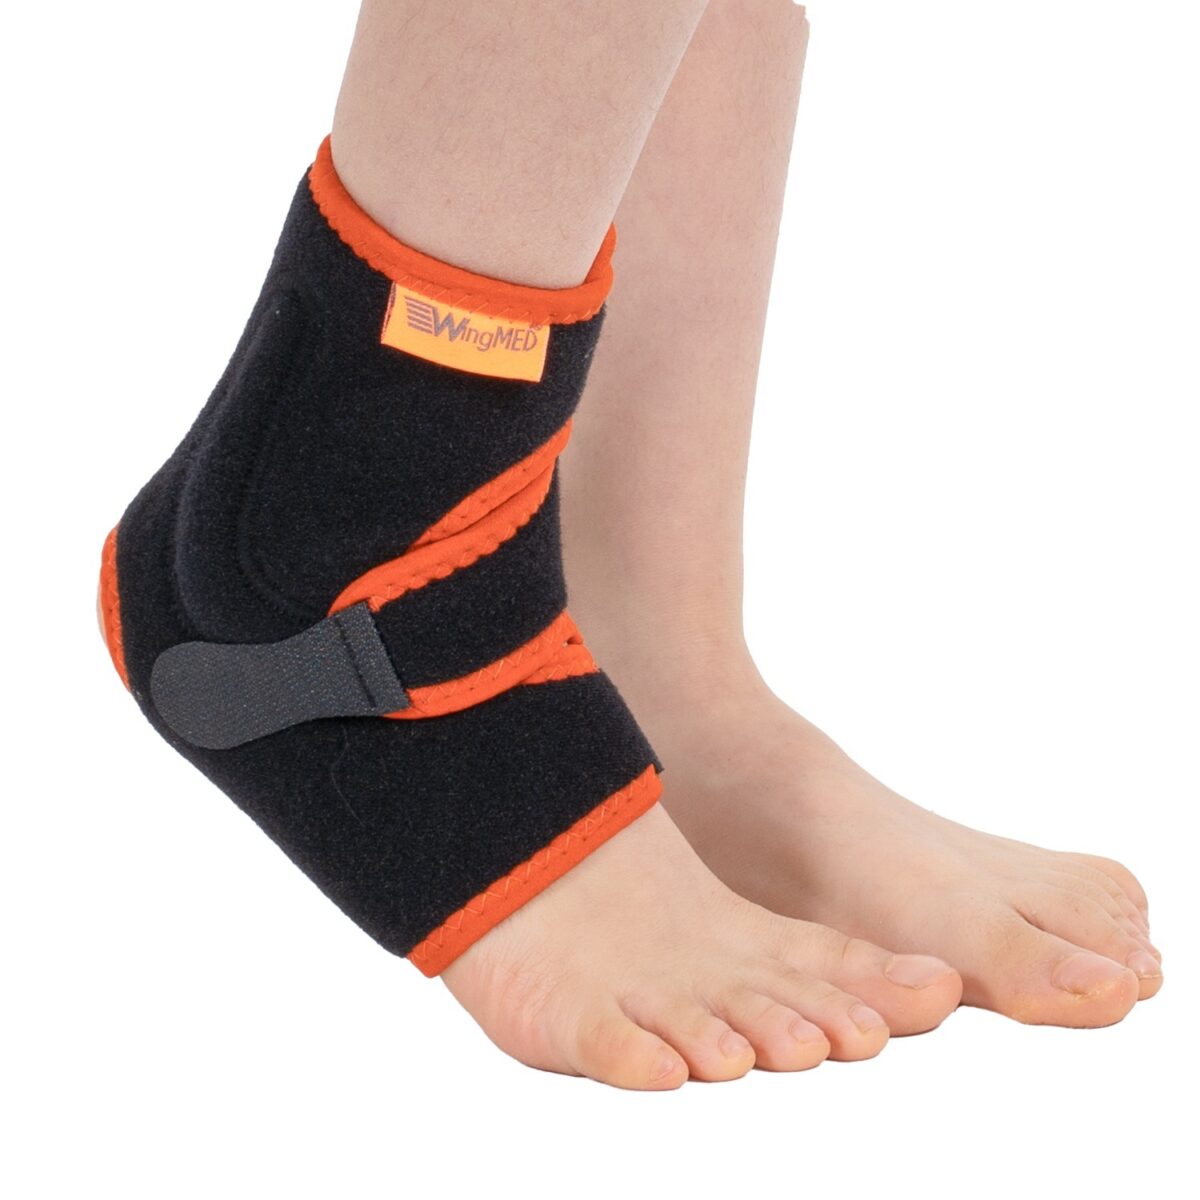 wingmed orthopedic equipments W921 malleol ankle support with 8 strap 28